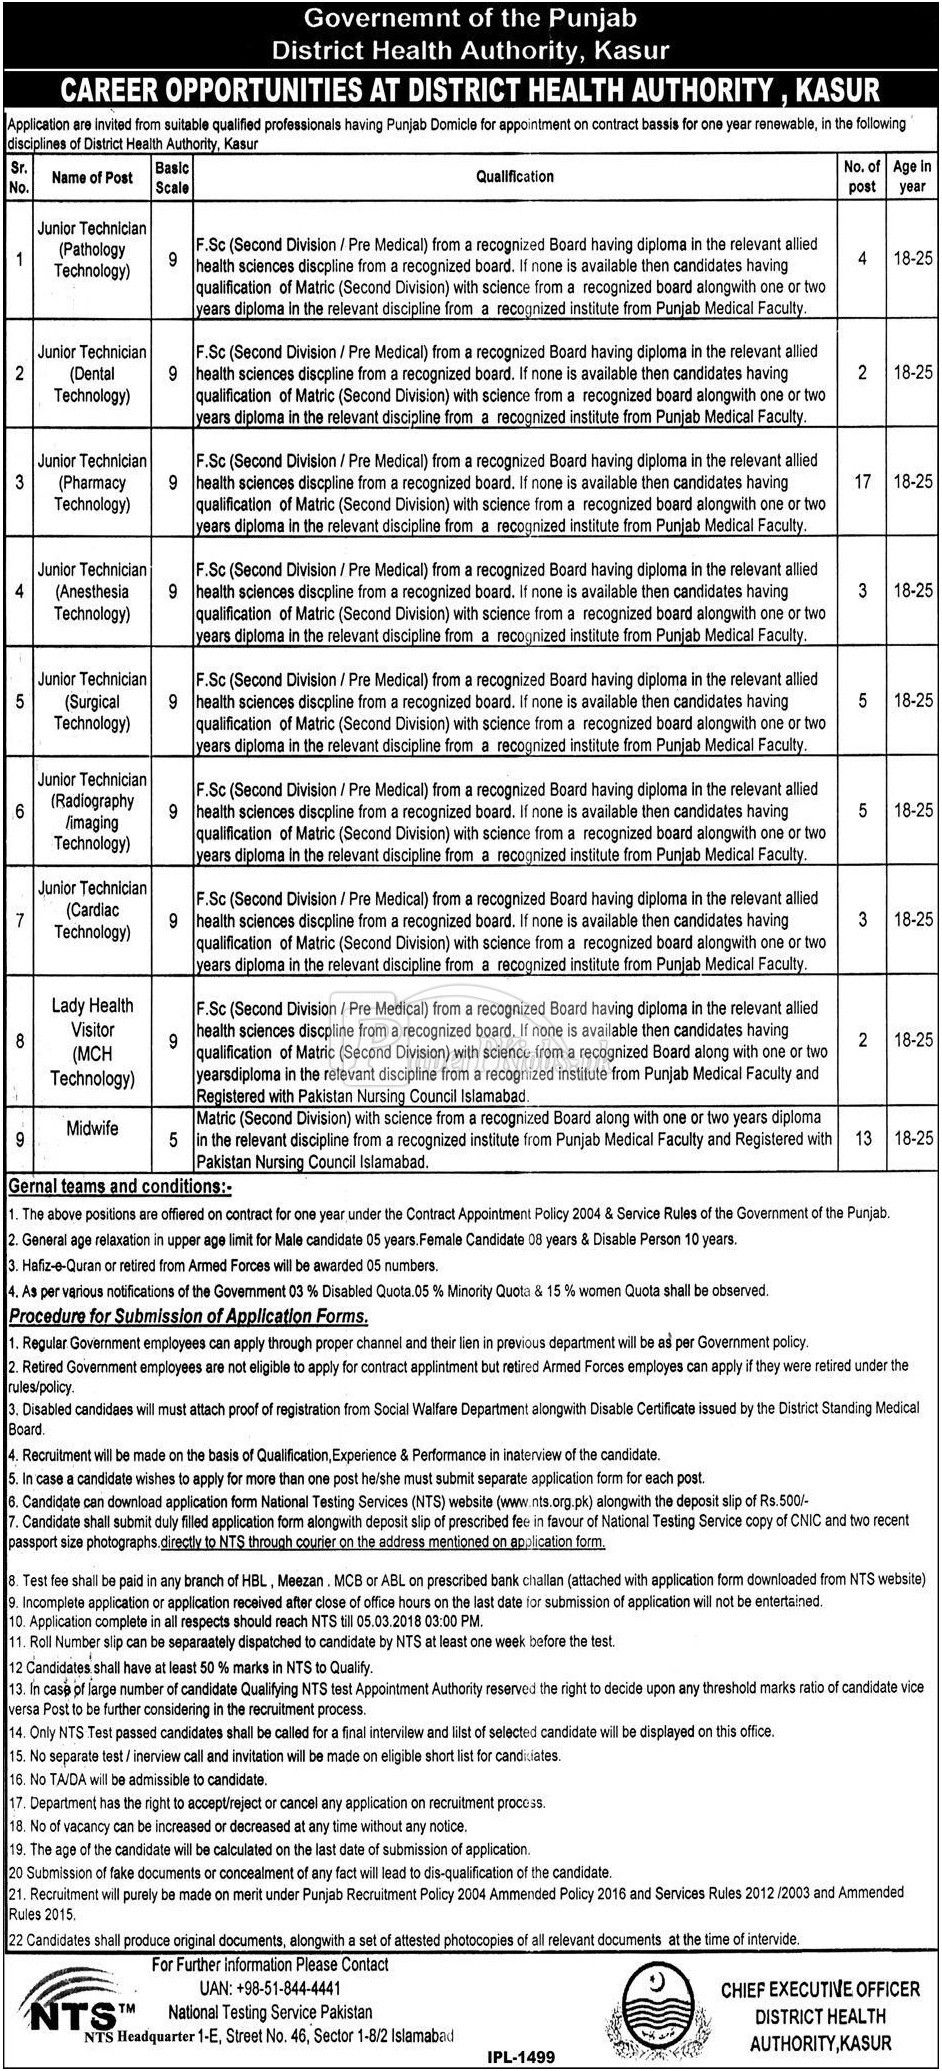 District Health Authority Kasur NTS Jobs Application Forms 2018